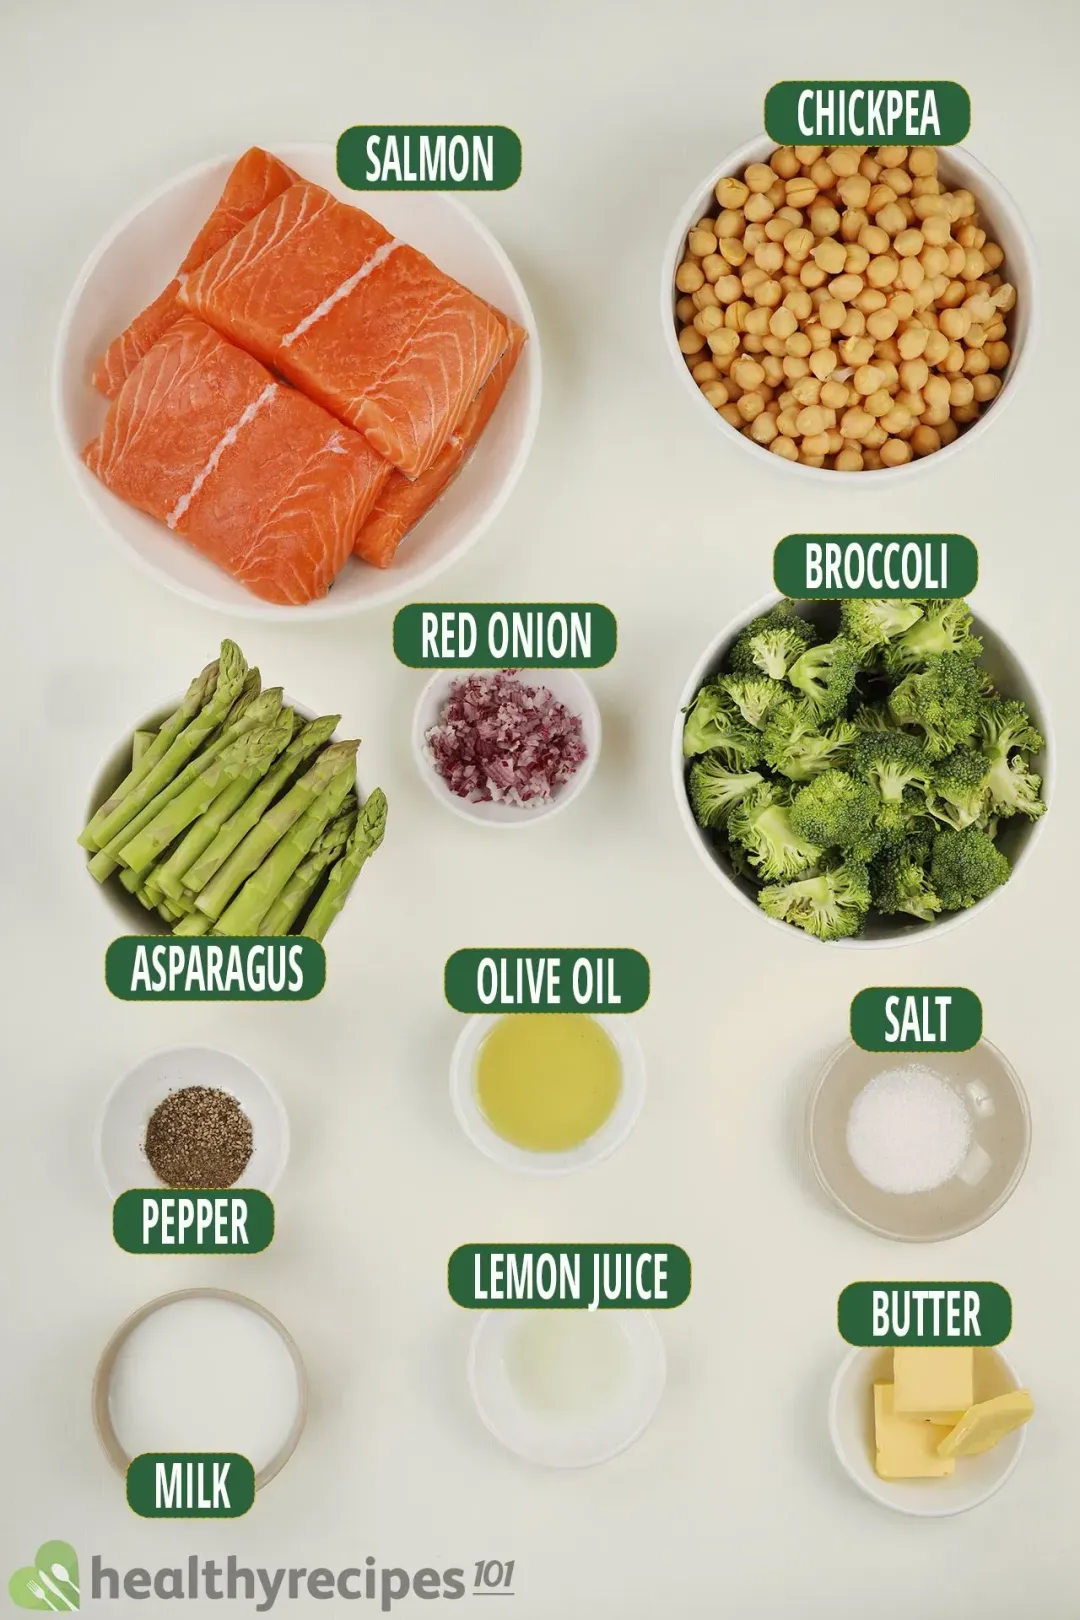 Ingredients for this crispy-skin salmon: boneless salmon fillets, canned chickpeas, broccoli florets, asparagus, diced red onions, unsalted butter, olive oil, lemon juice, whole milk, salt, and ground black pepper